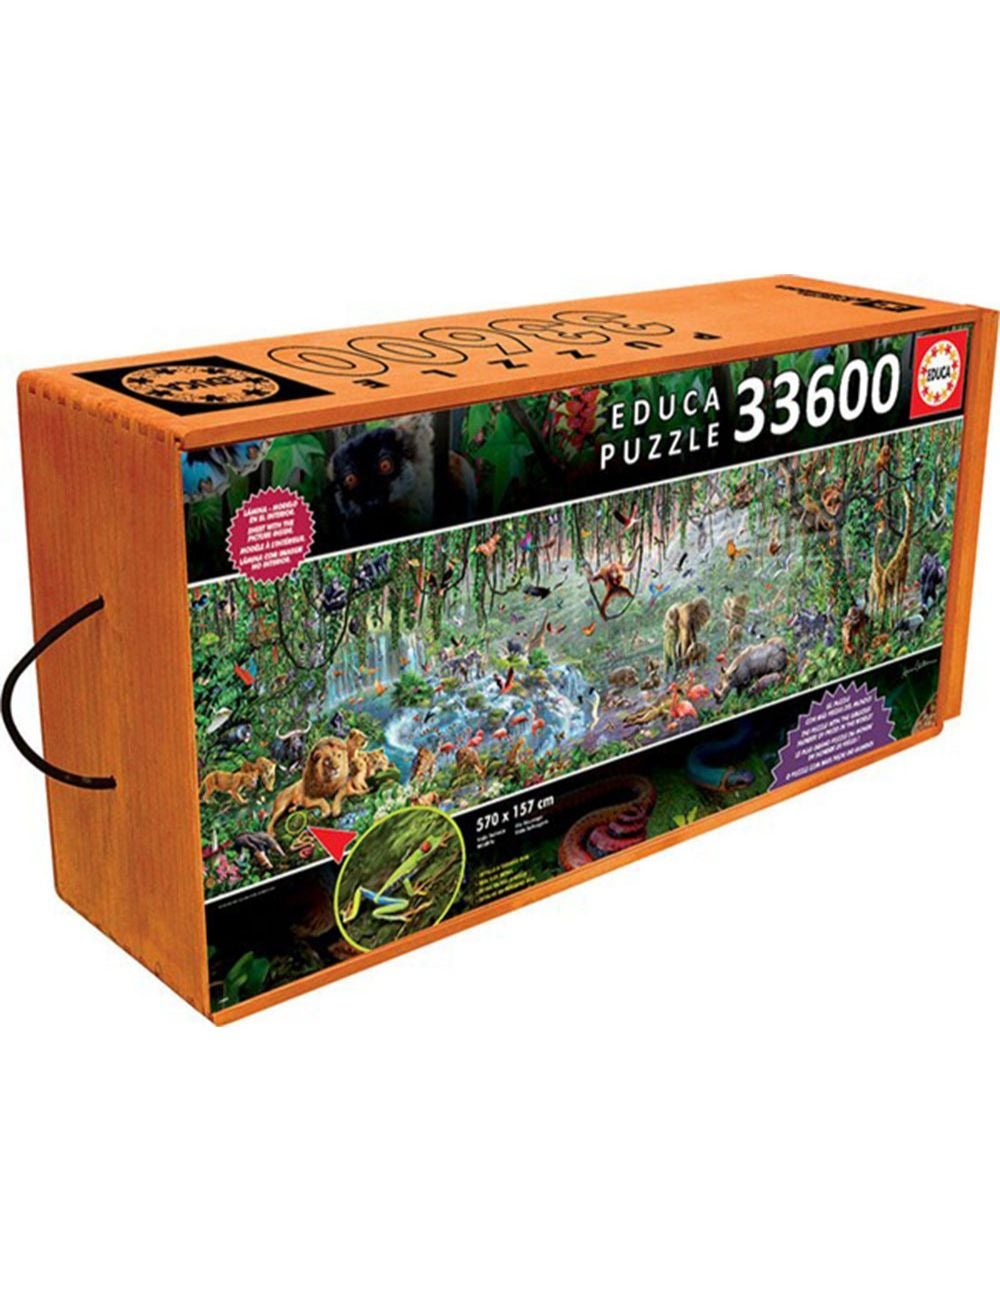 Life, The Great Challenge 24,000 Pieces Jigsaw Puzzle | Educa